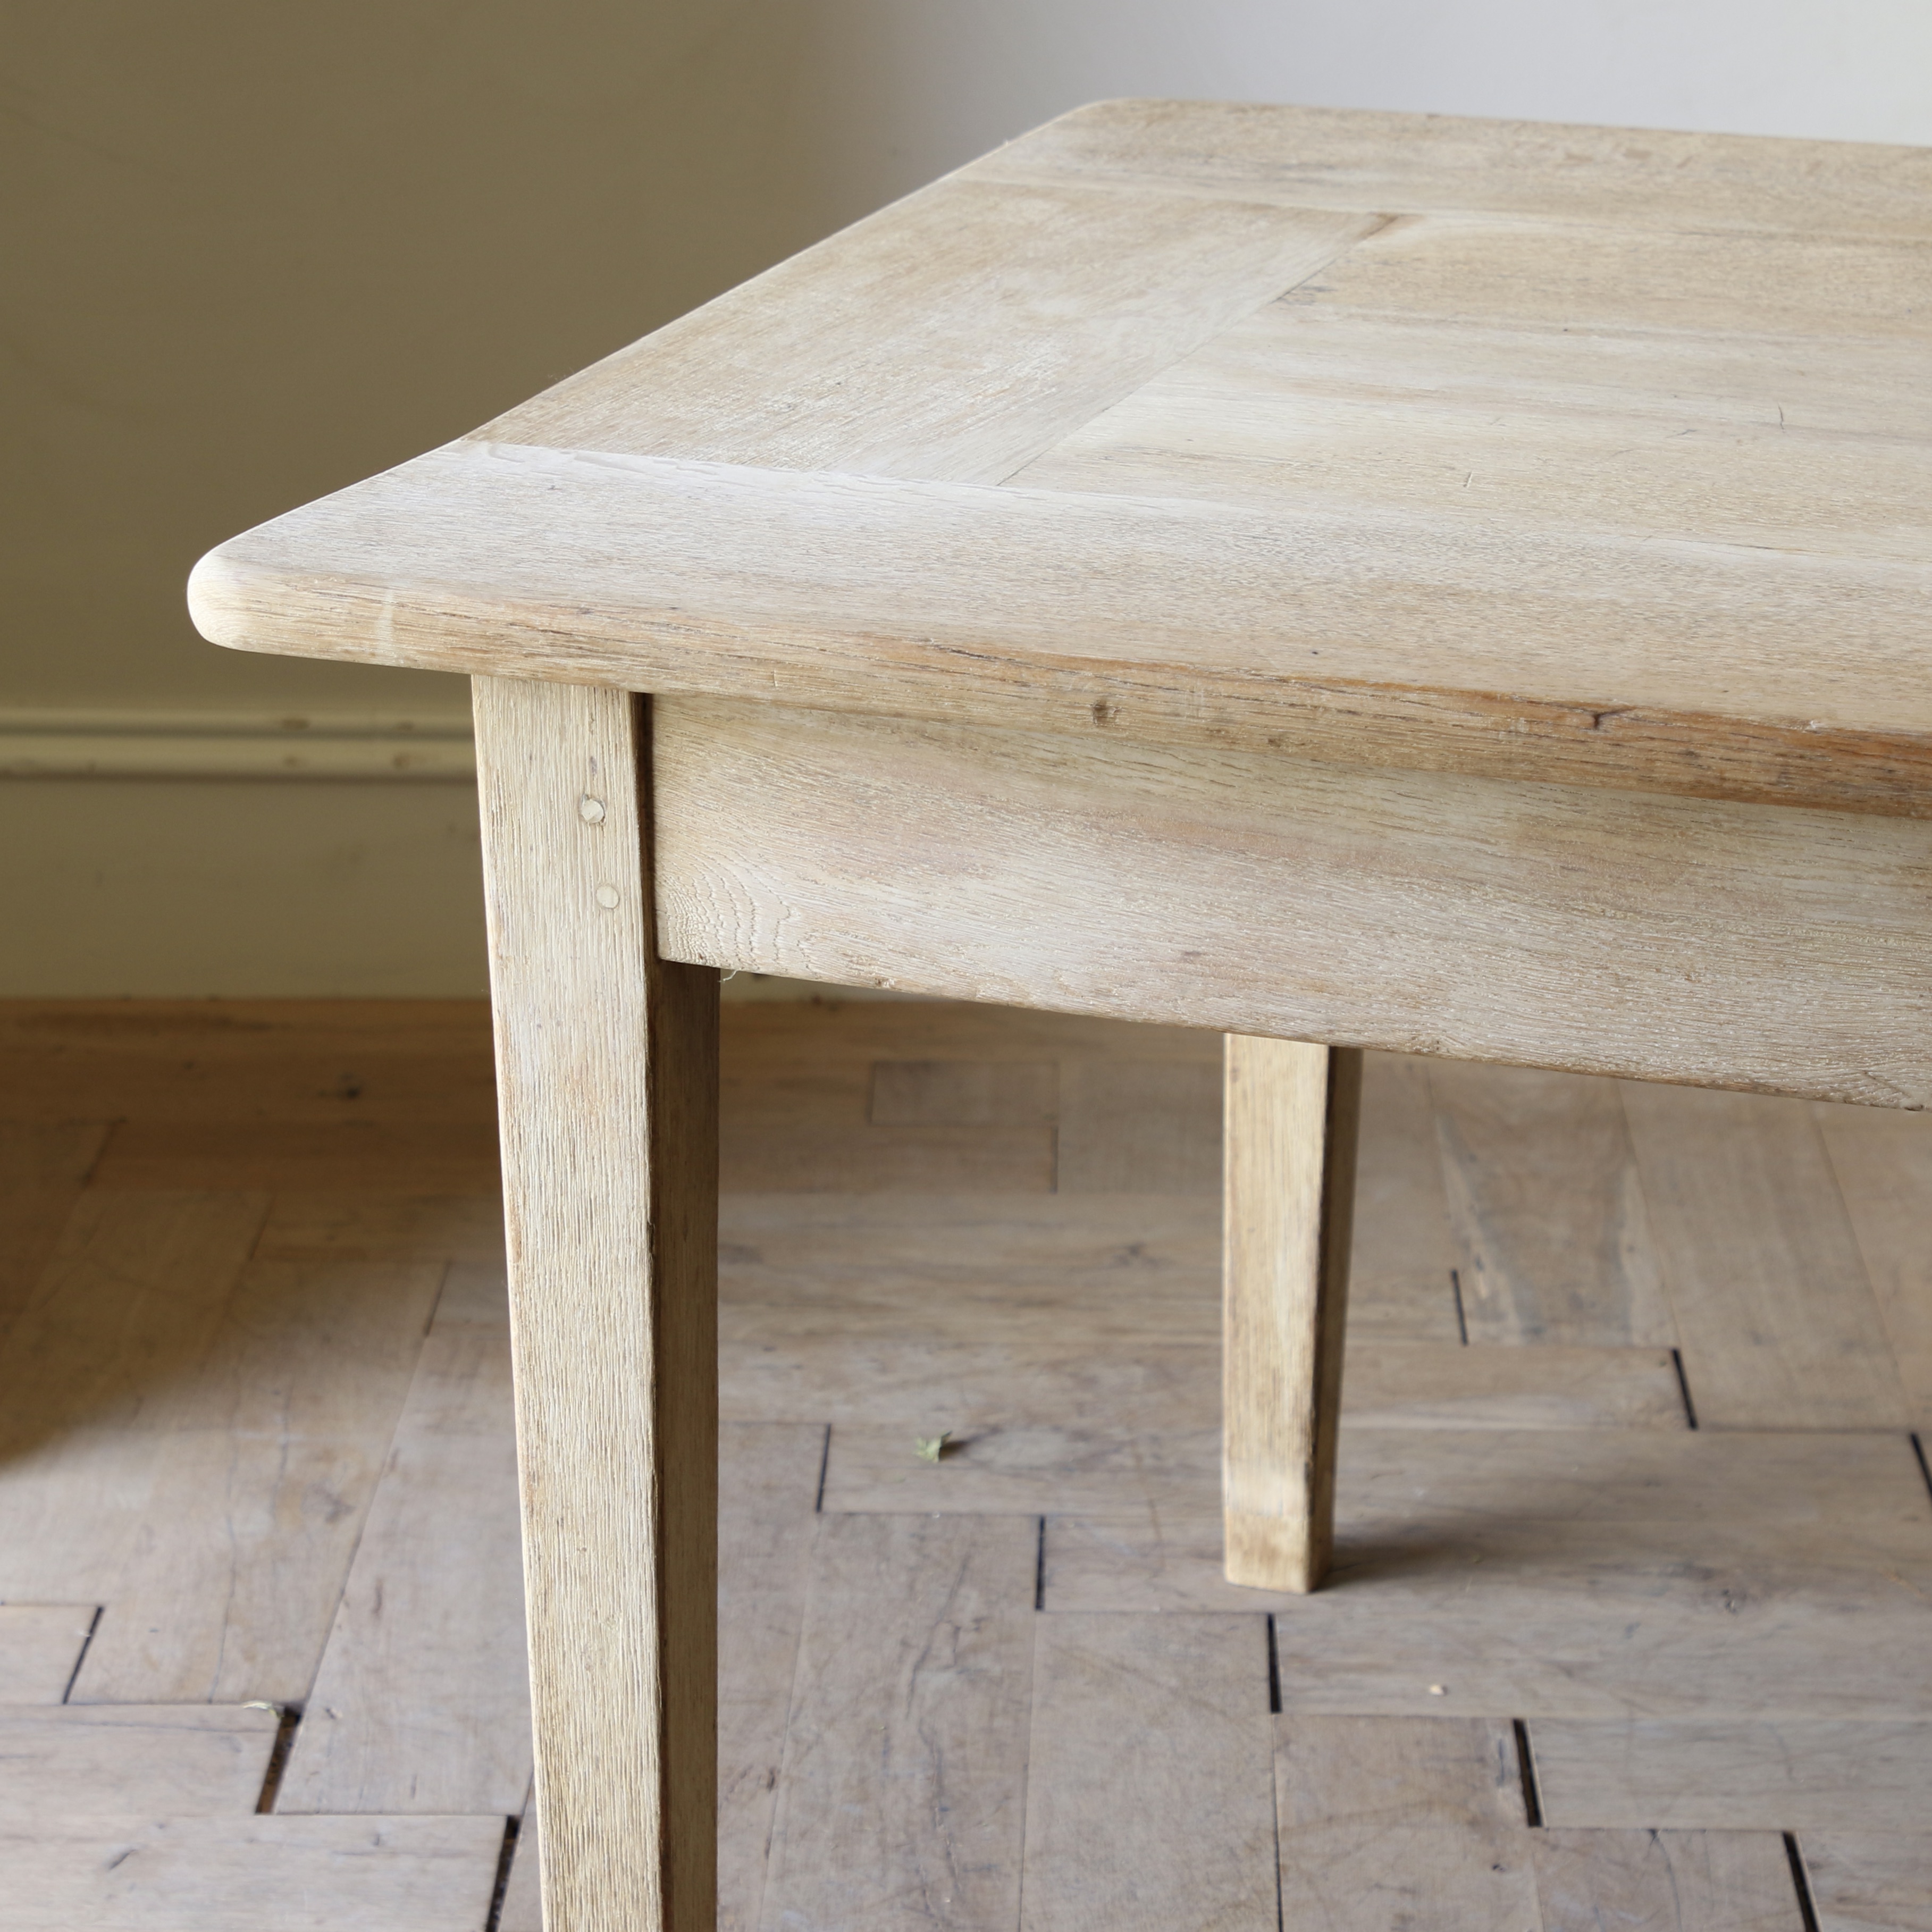 Bleached Oak Dining Table// Length 2.3m